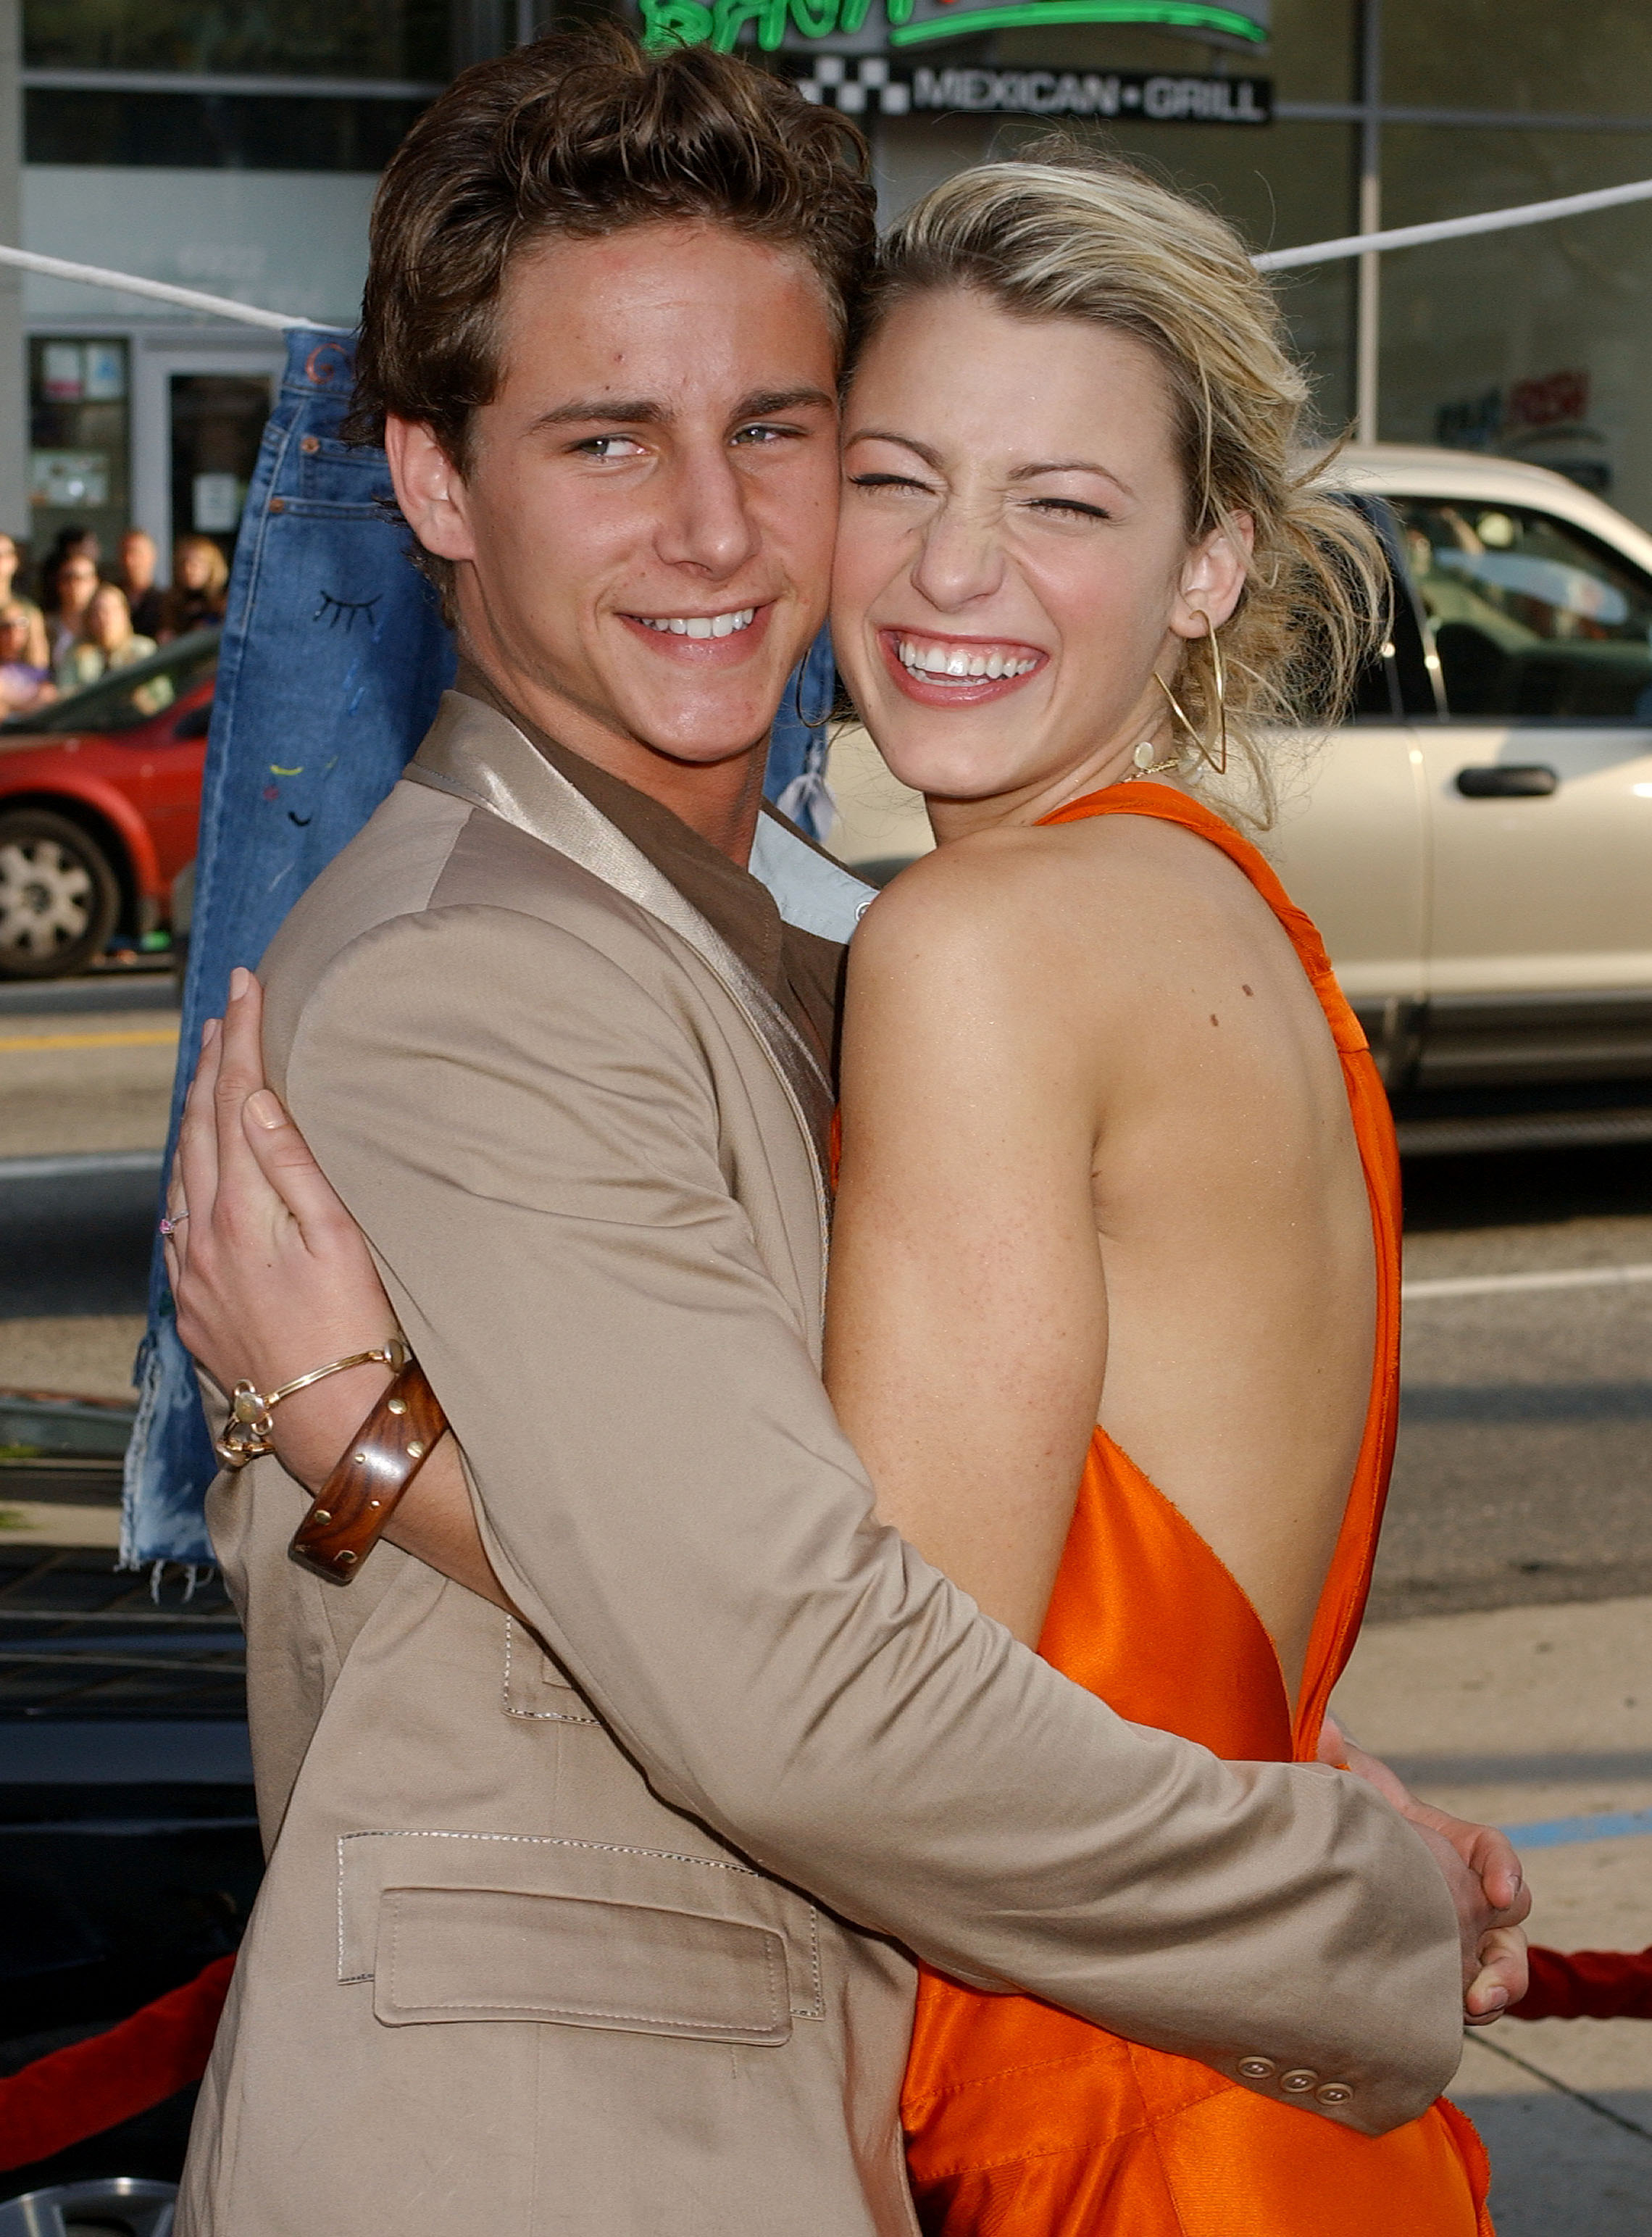 Blake and Kelly embracing, she in an orange dress and he in a beige suit